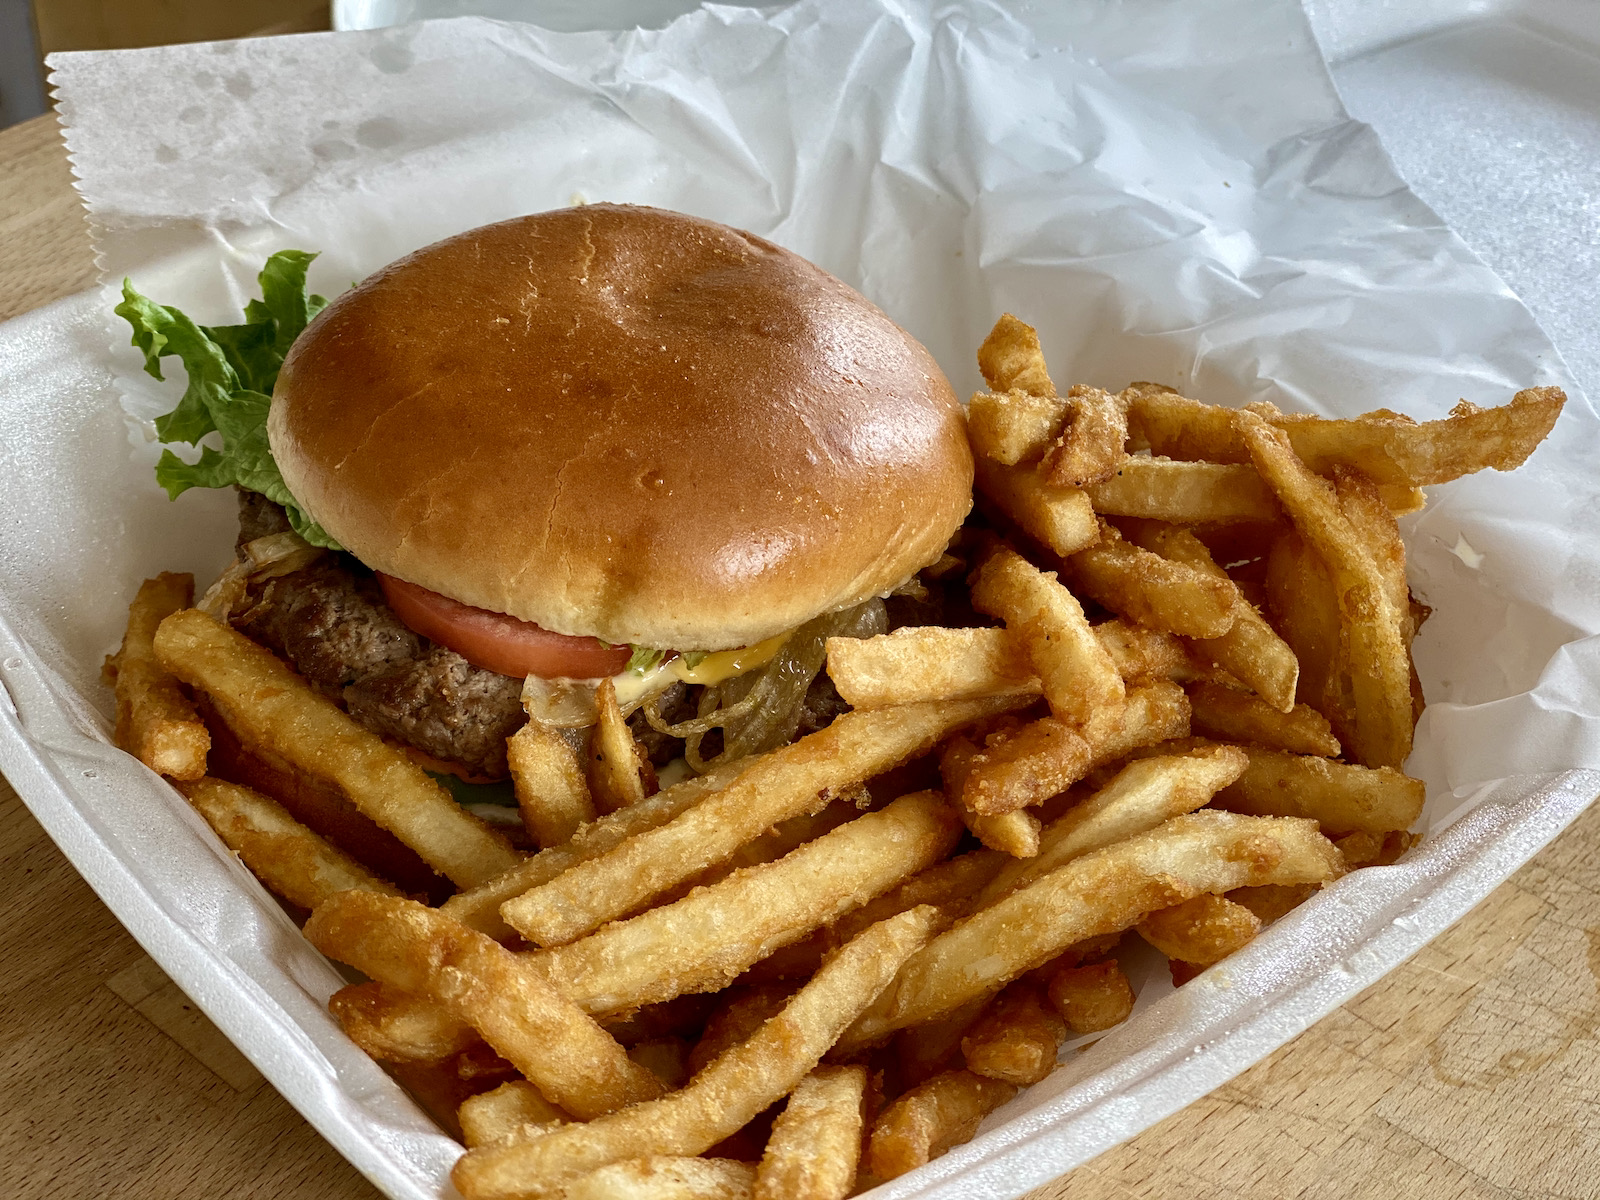 The Piaza Burger inside its styrofoam container